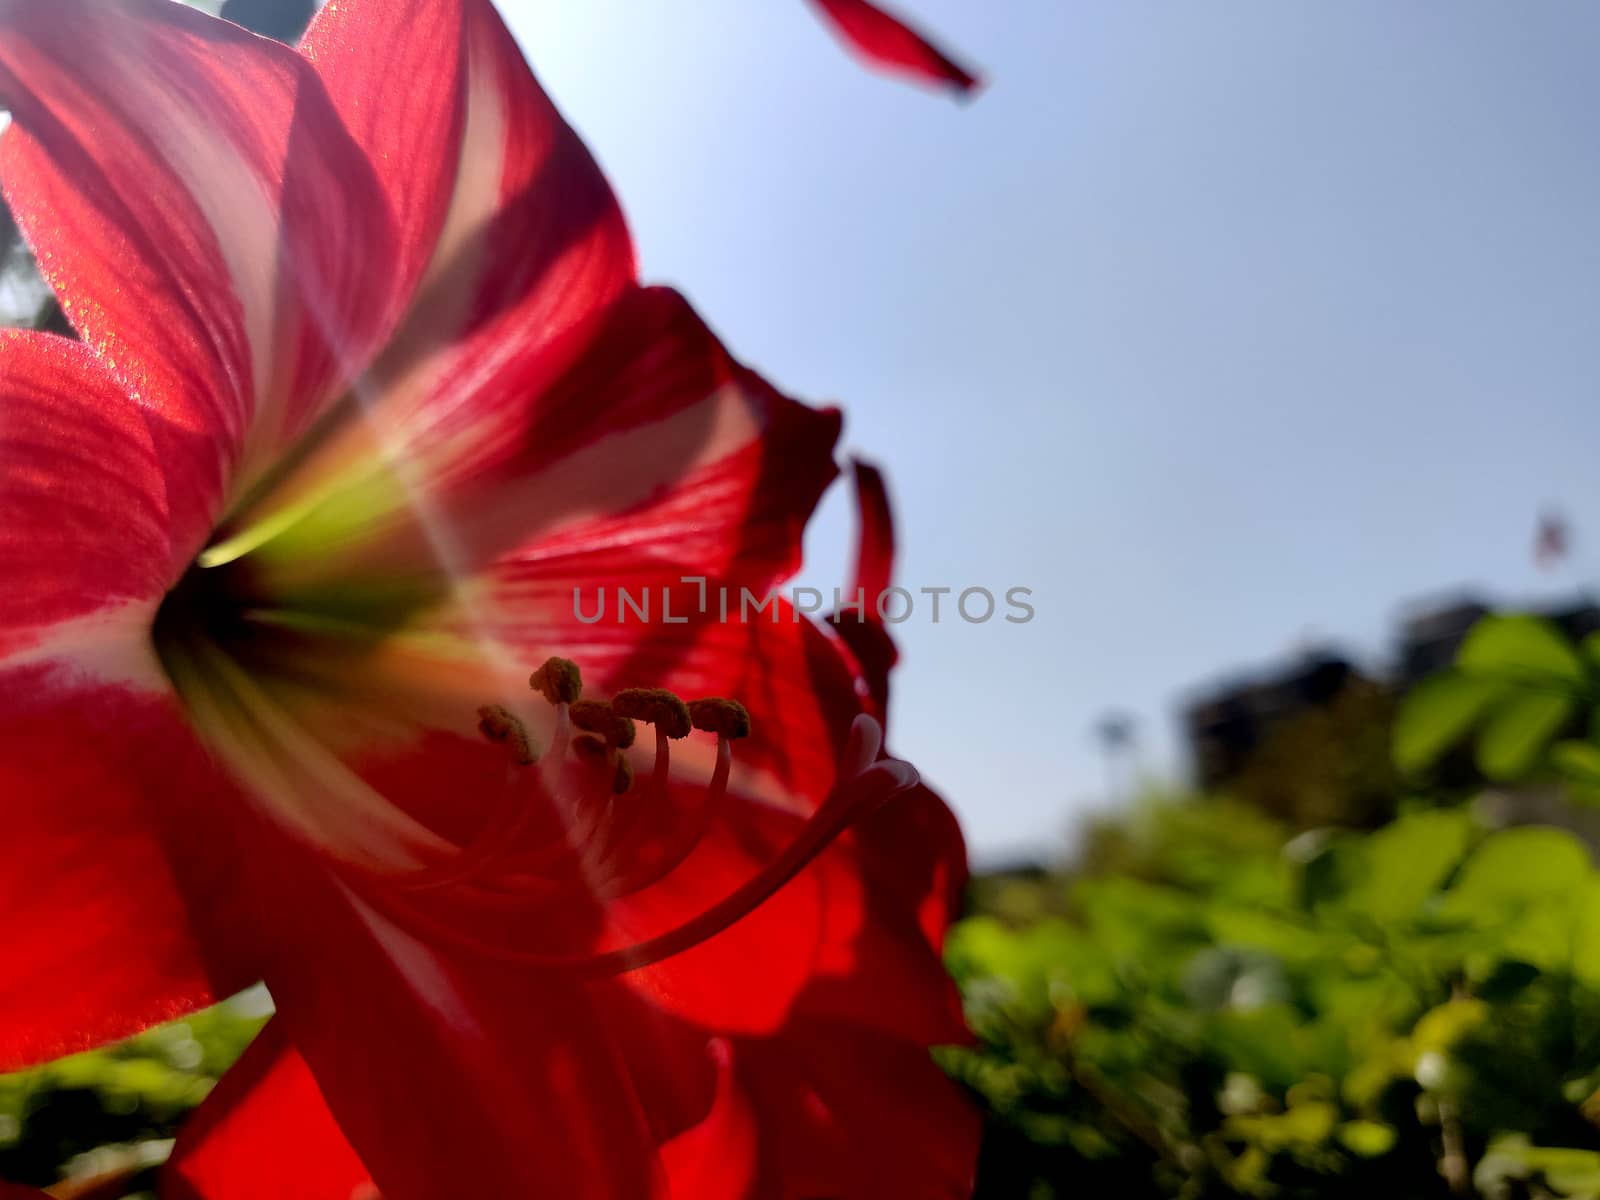 Red striped barbados lily with lens flare by mshivangi92